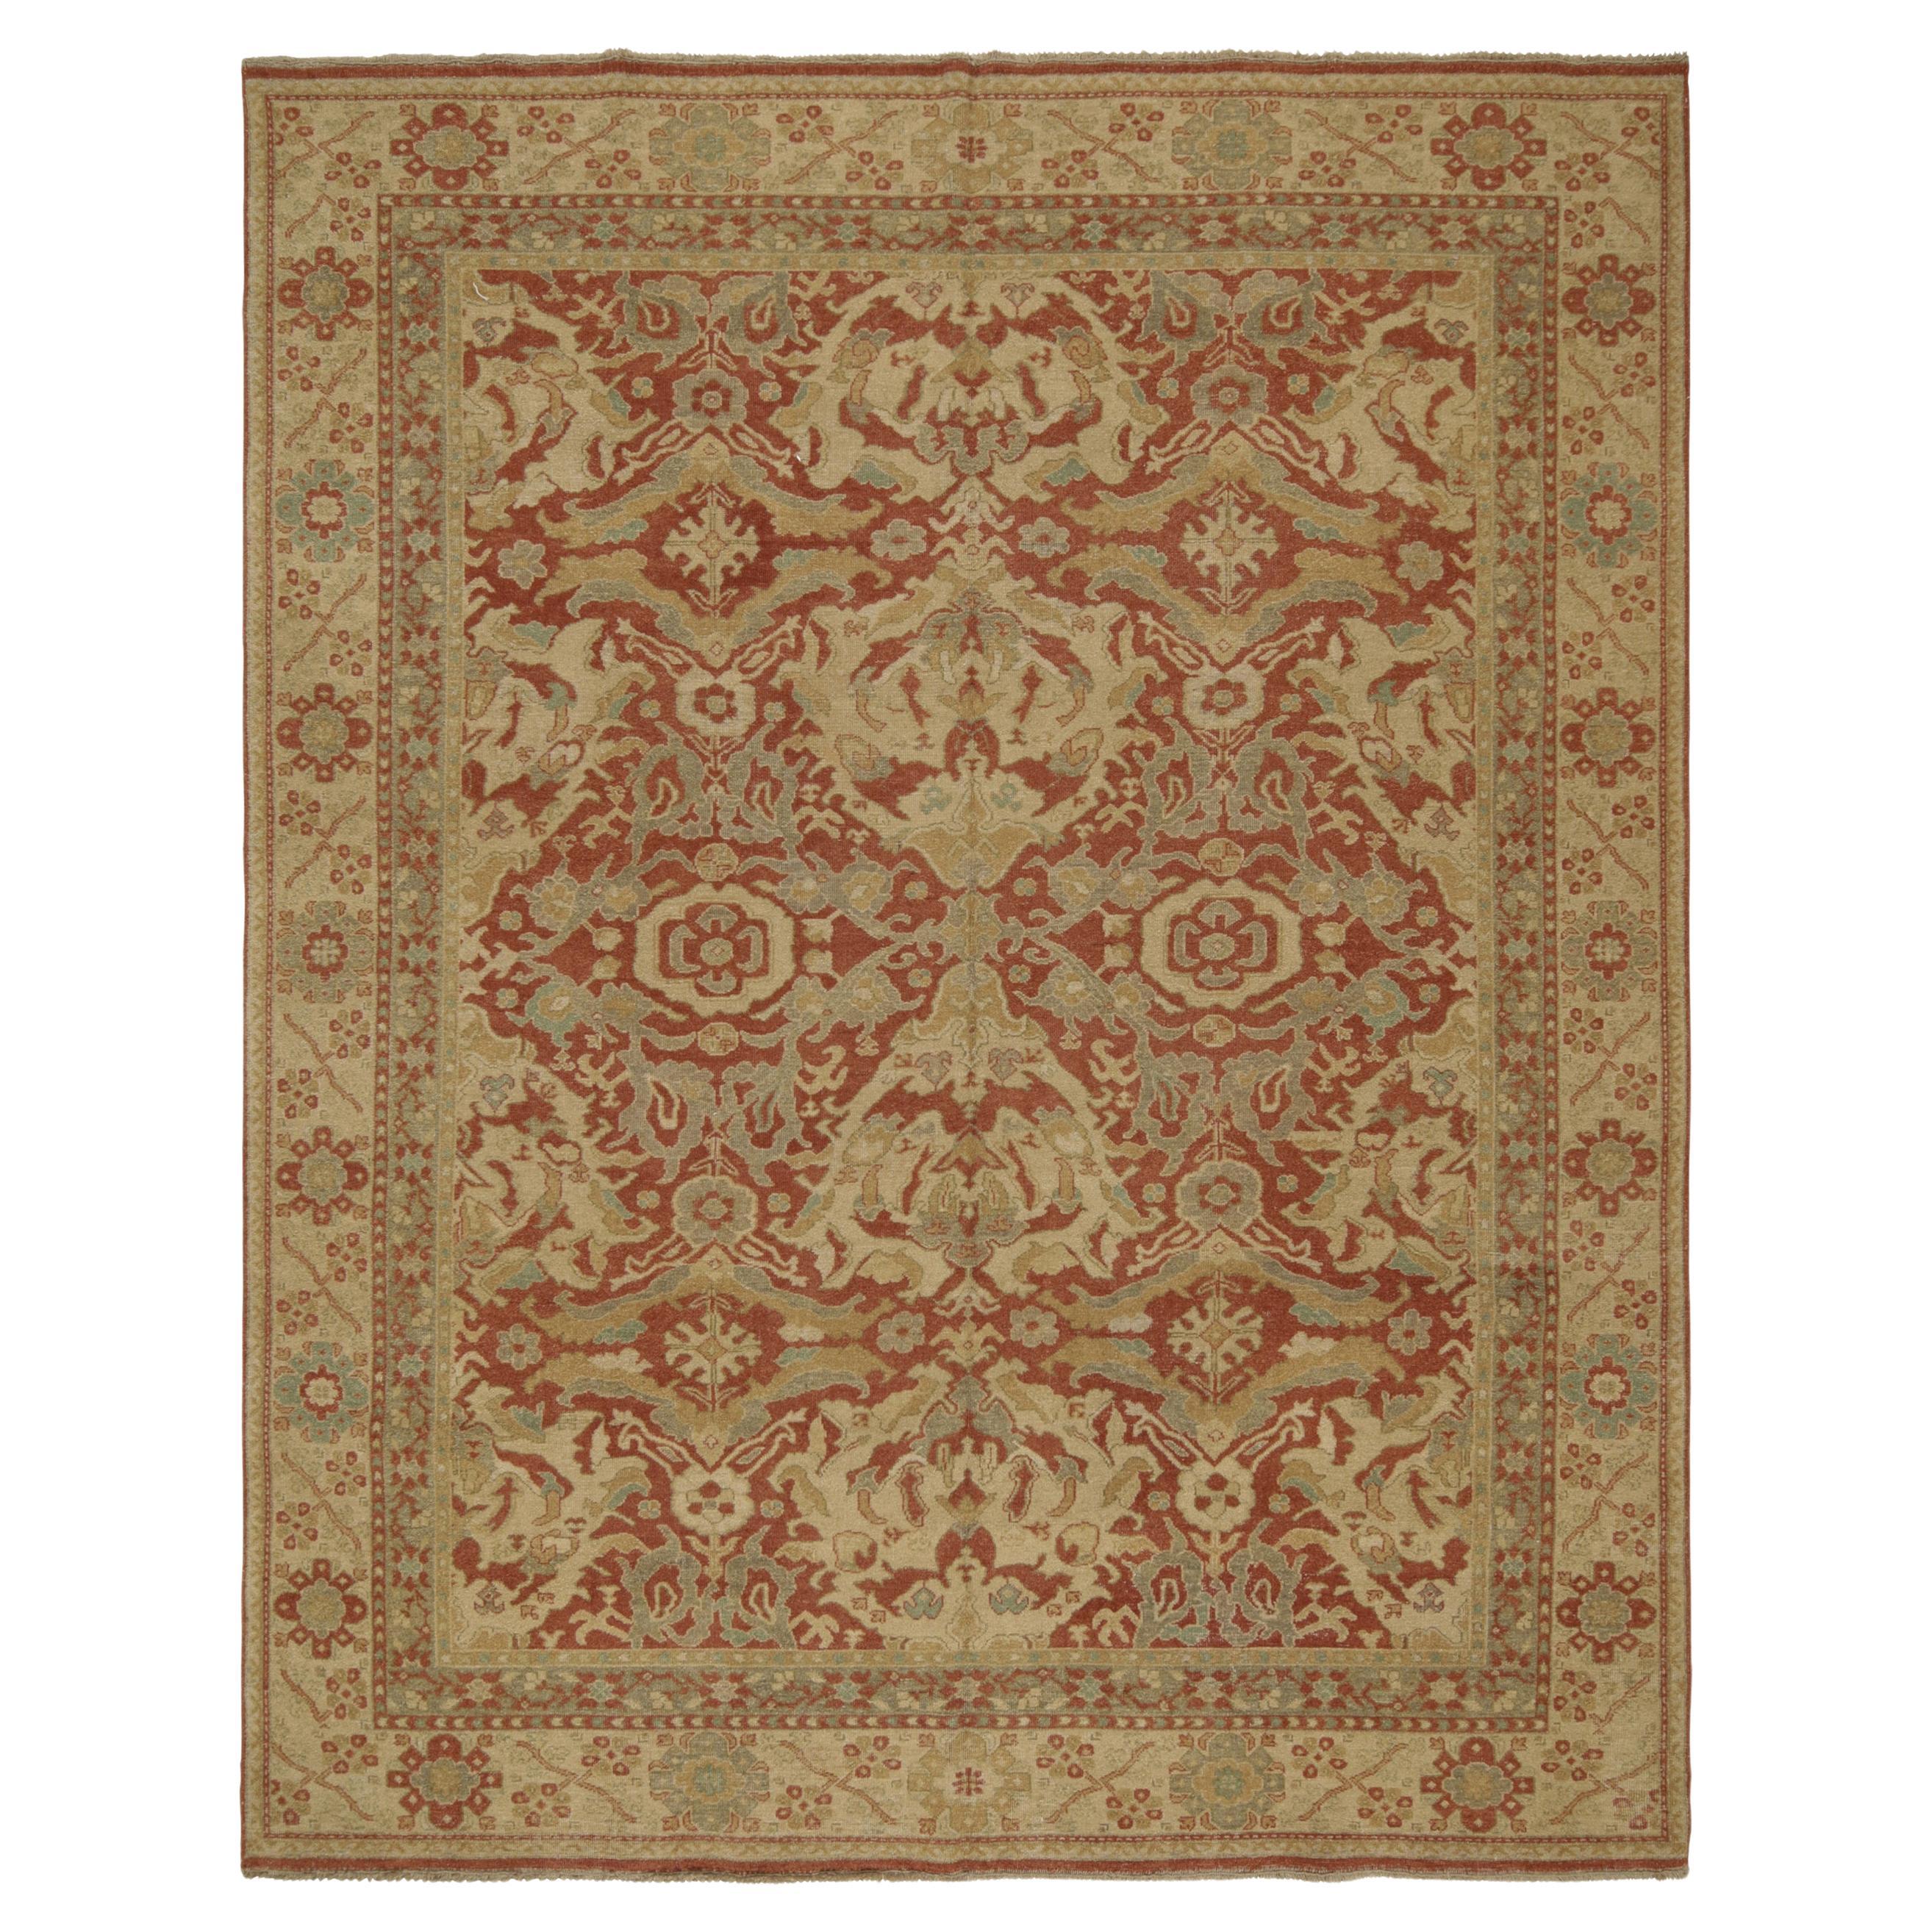 Rug & Kilim’s Oushak style Rug in Red, Beige and Gray-Blue Floral Pattern For Sale